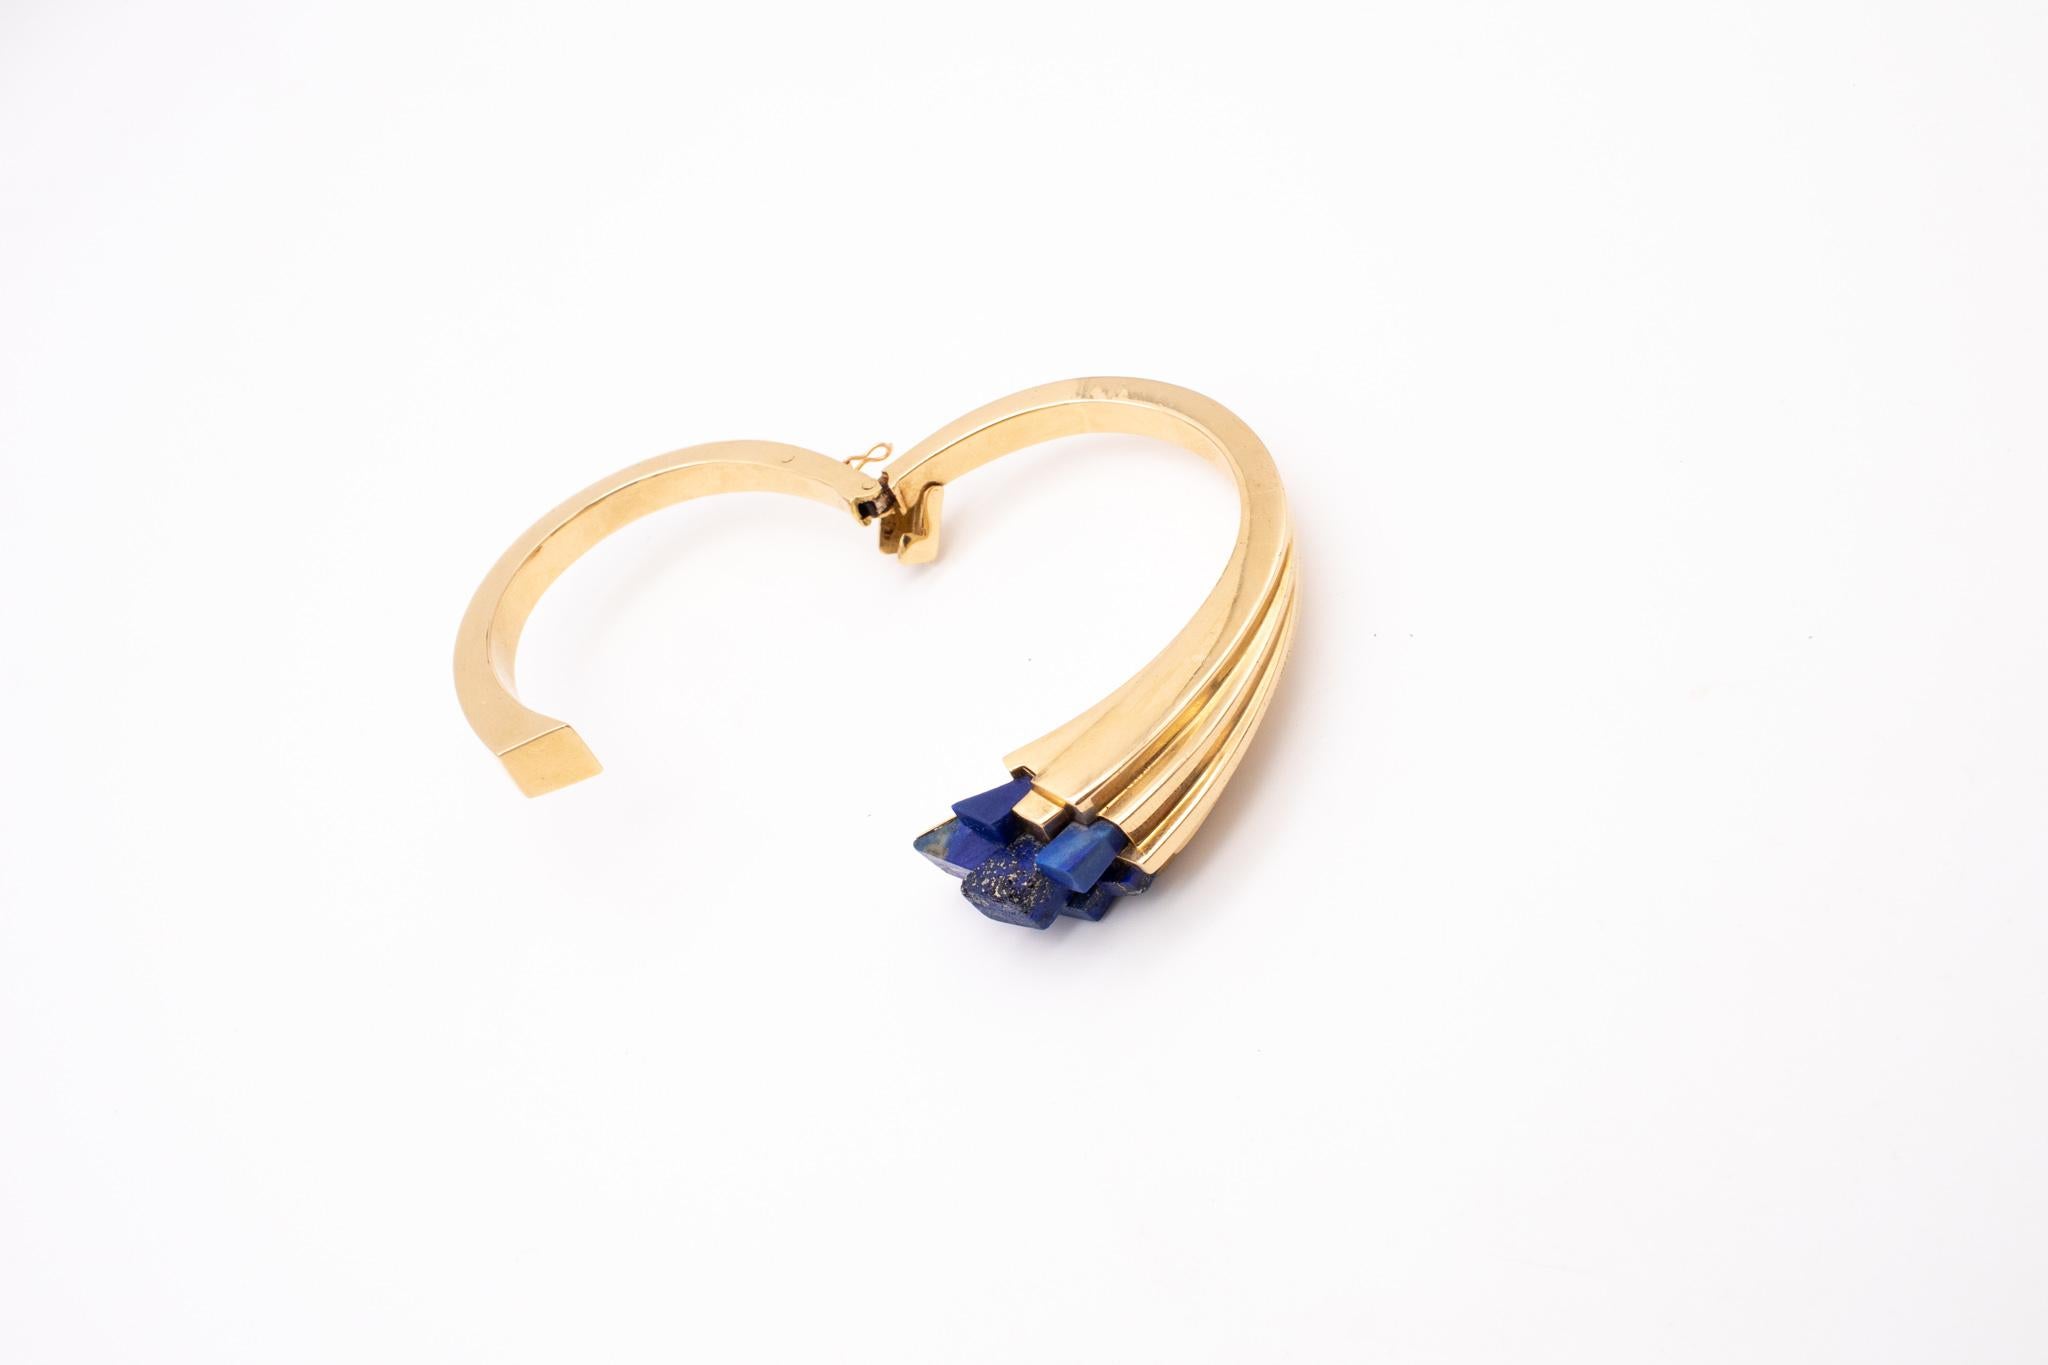 Mellerio 1970 Paris Very Rare Geometric Bracelet In 18Kt Gold With Lapis Lazuli In Excellent Condition For Sale In Miami, FL